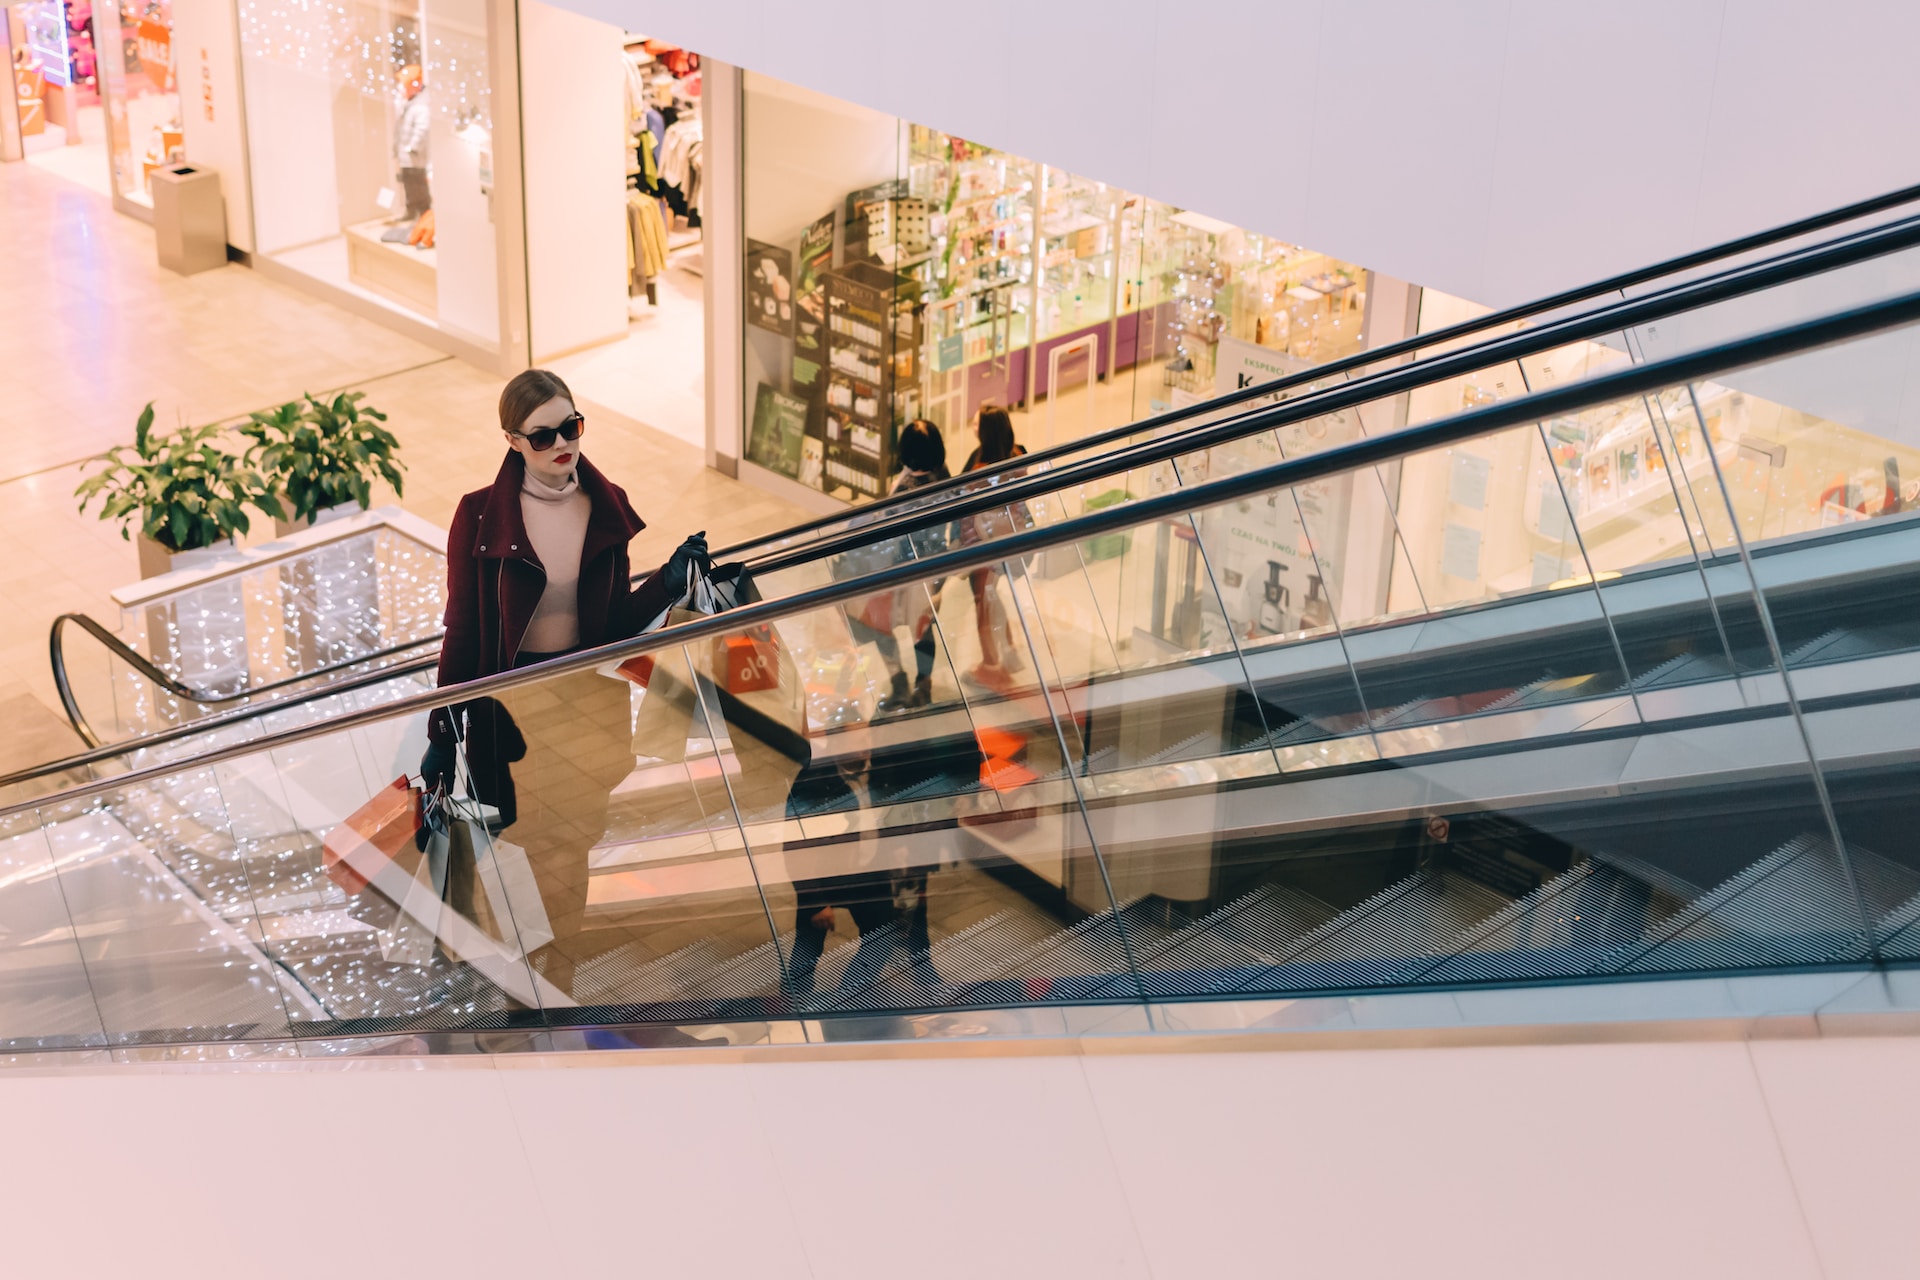 woman on an escalator in a shopping mall or retail environment  